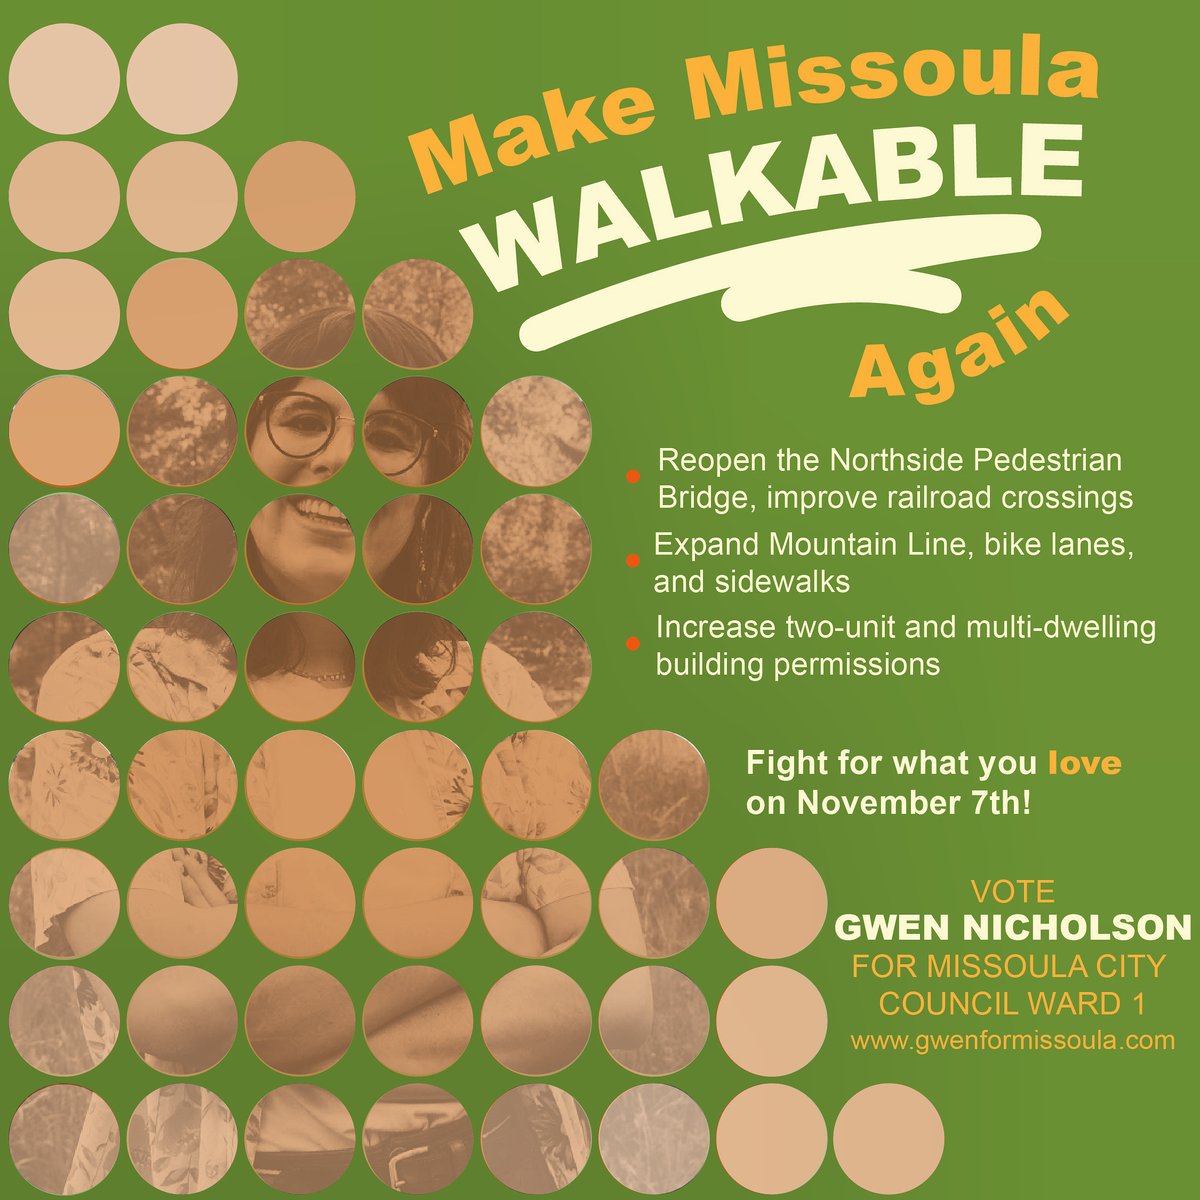 Building stronger neighborhoods in Missoula means making them walkable, safe and accessible to all. Let's work together to make it happen! #walkablecity #missoula #missoulamontana #missoulamt